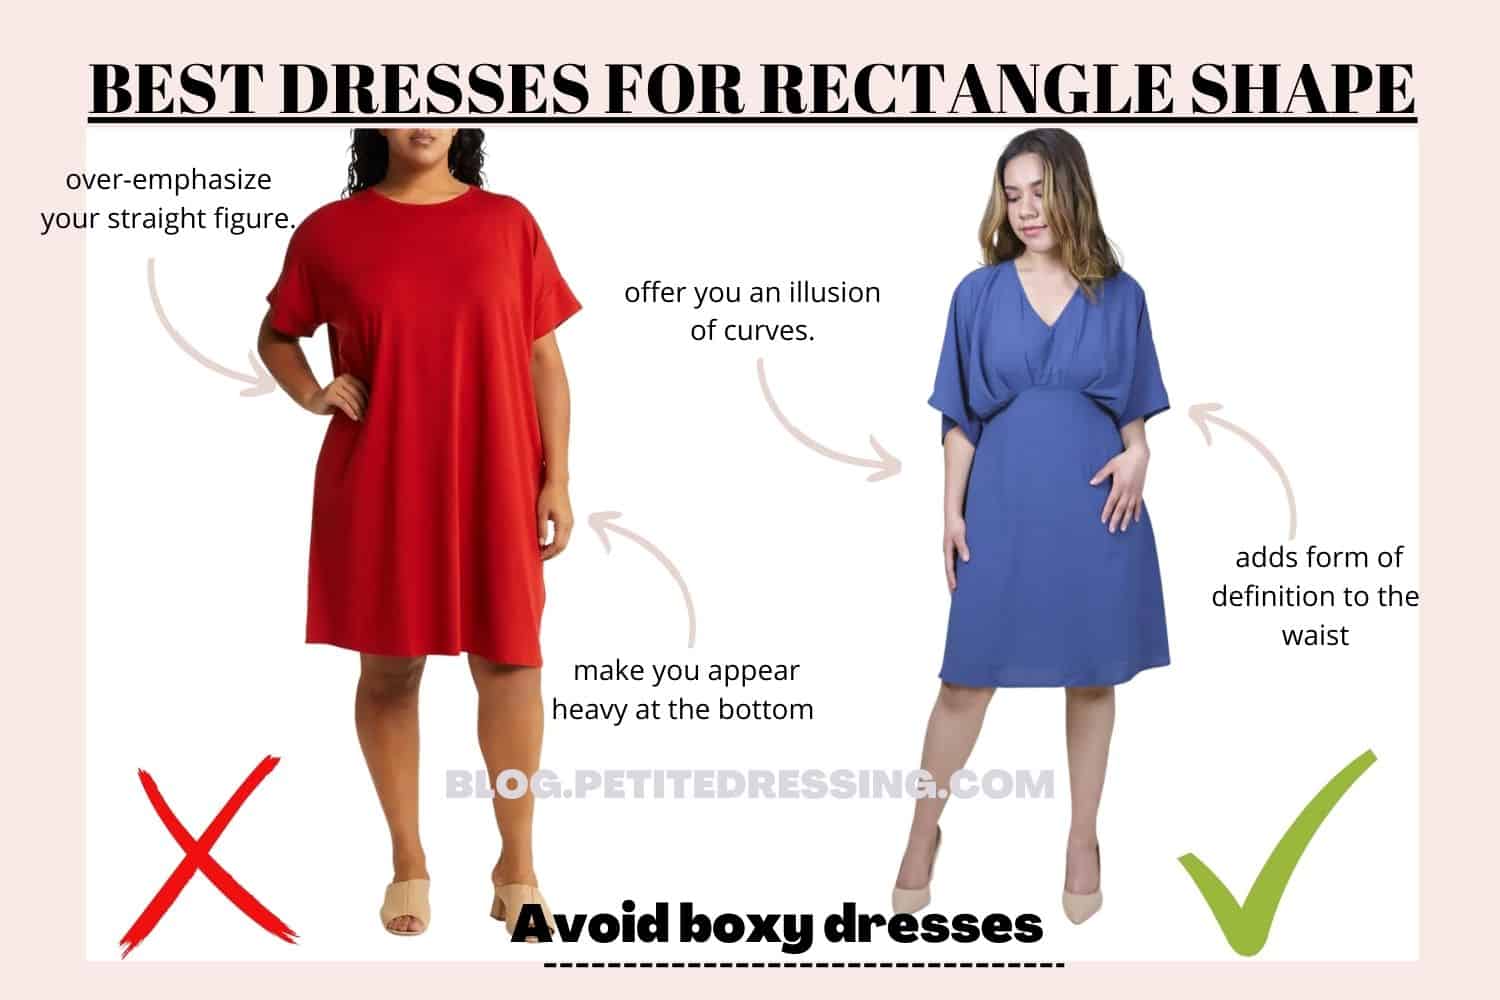 The Complete Dress Guide for Rectangle Body Type